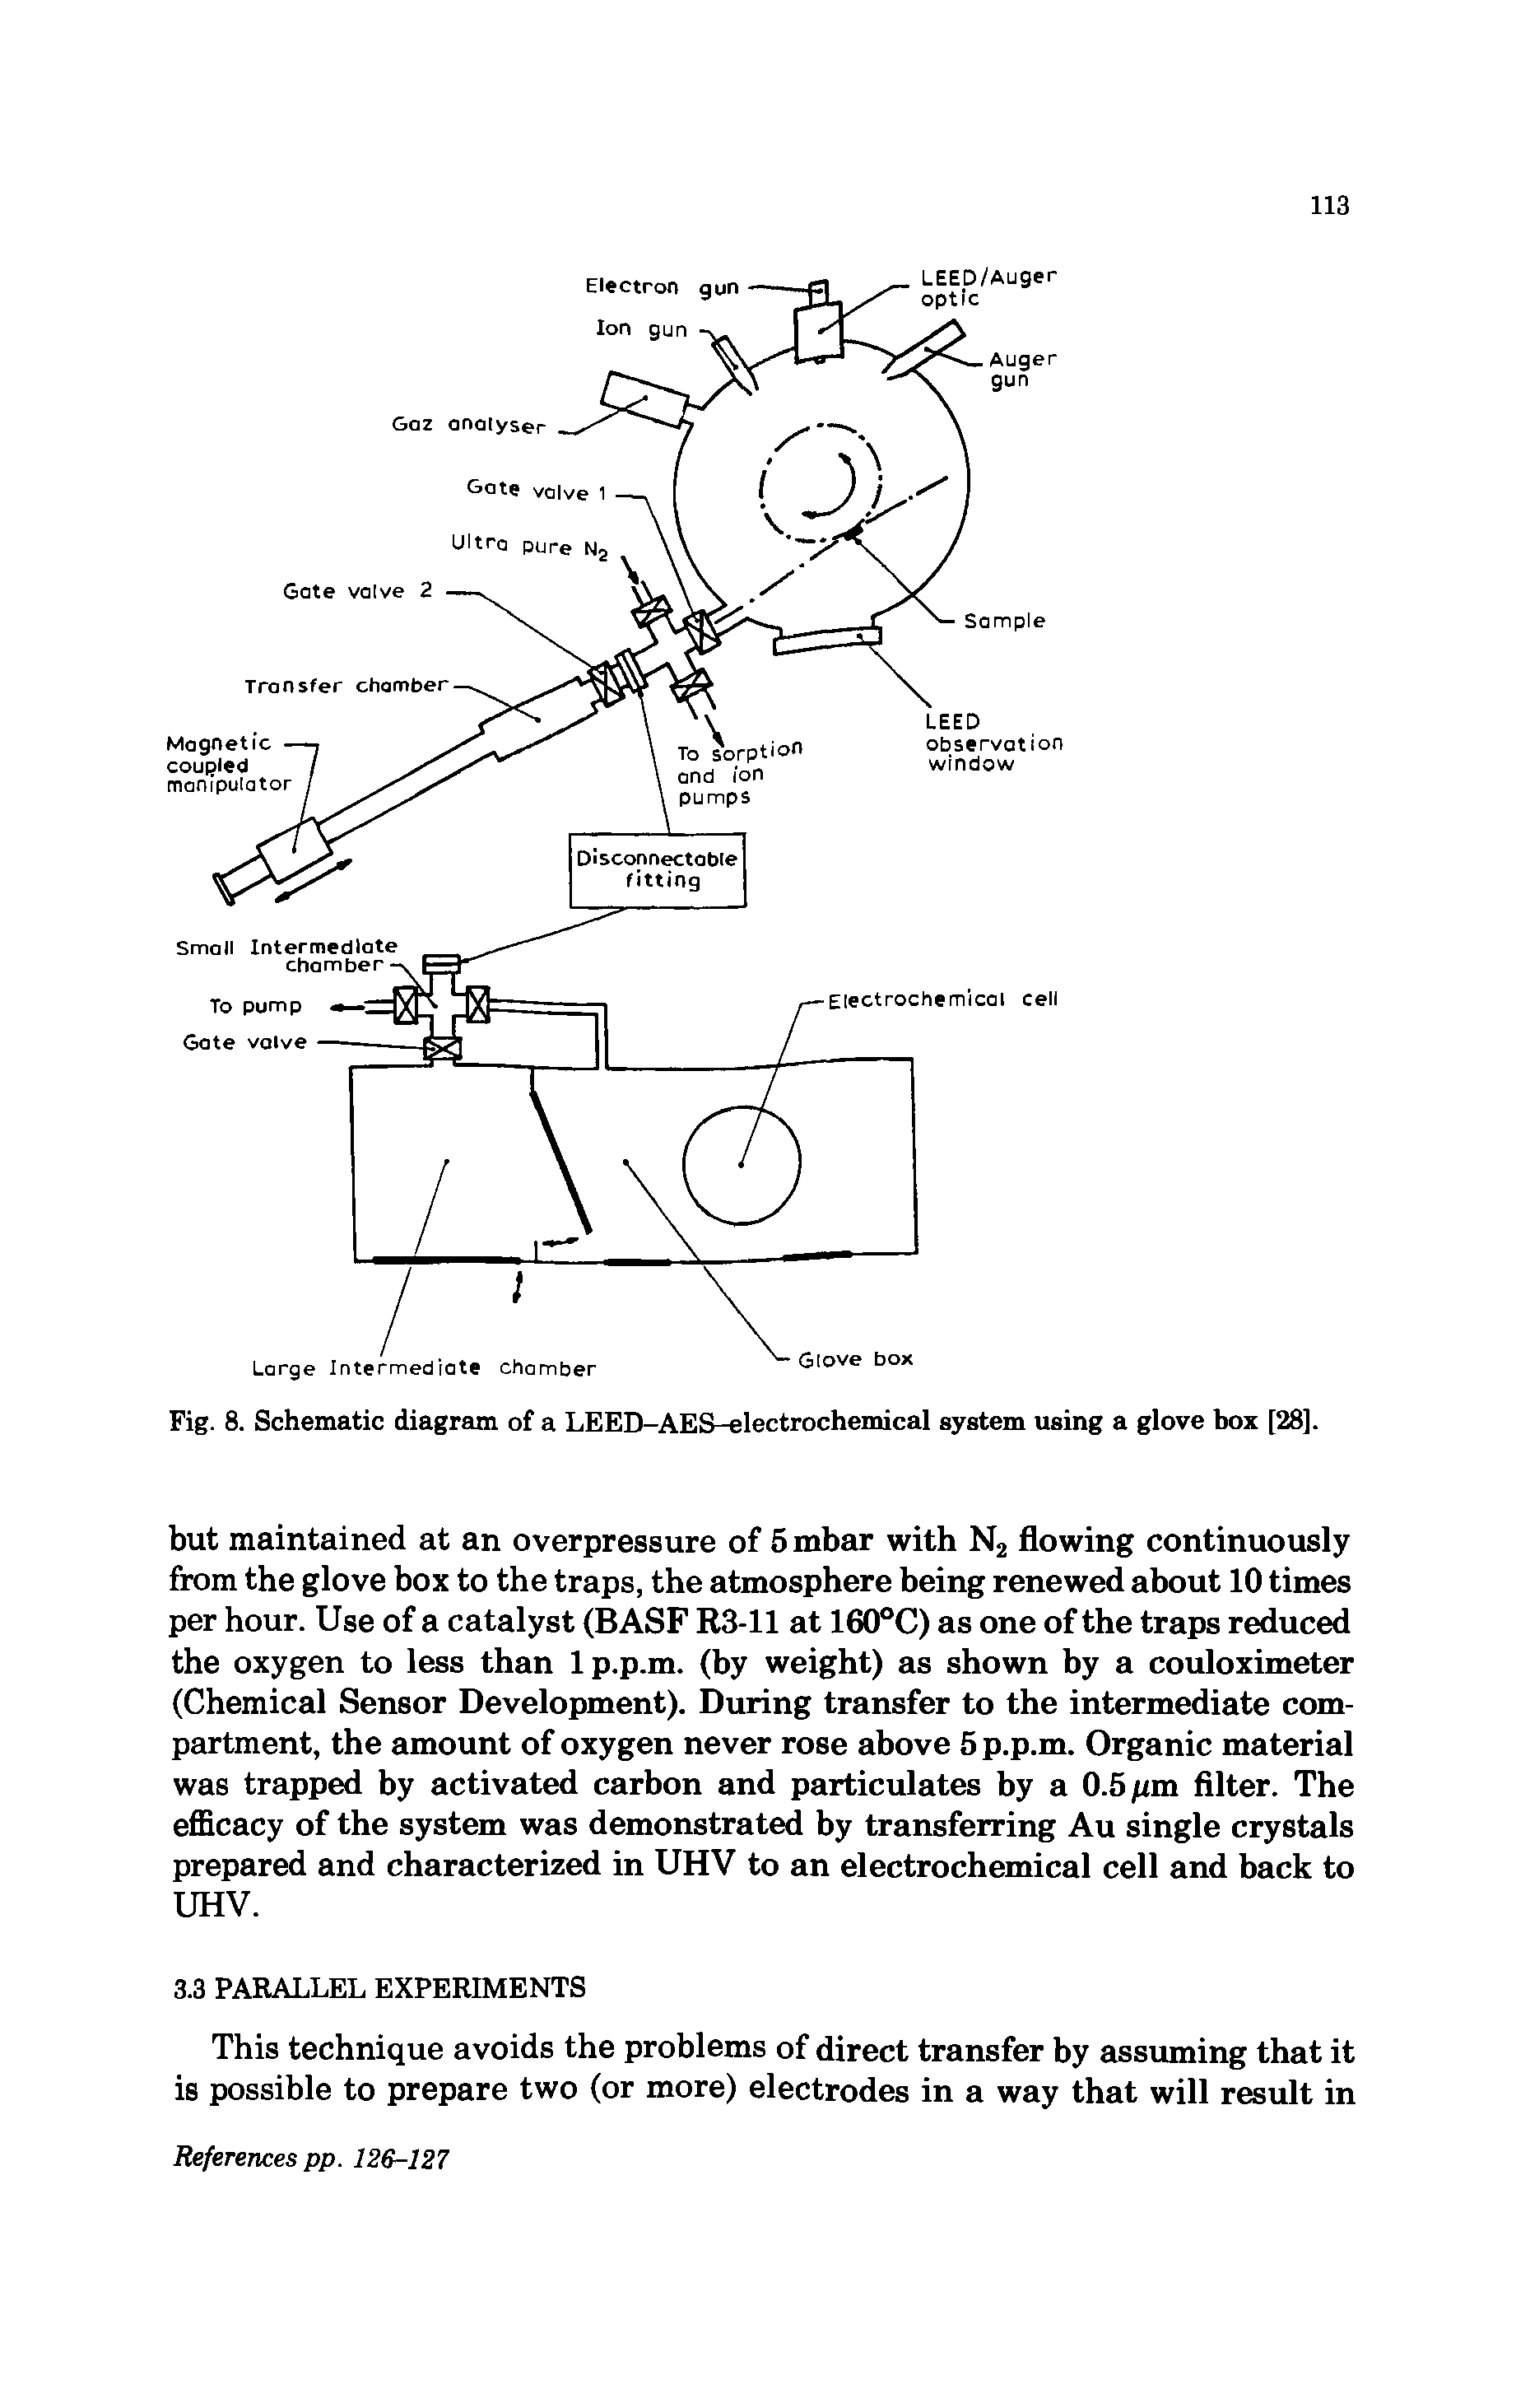 Fig. 8. Schematic diagram of a LEED-AES-electrochemical system using a glove box [28].